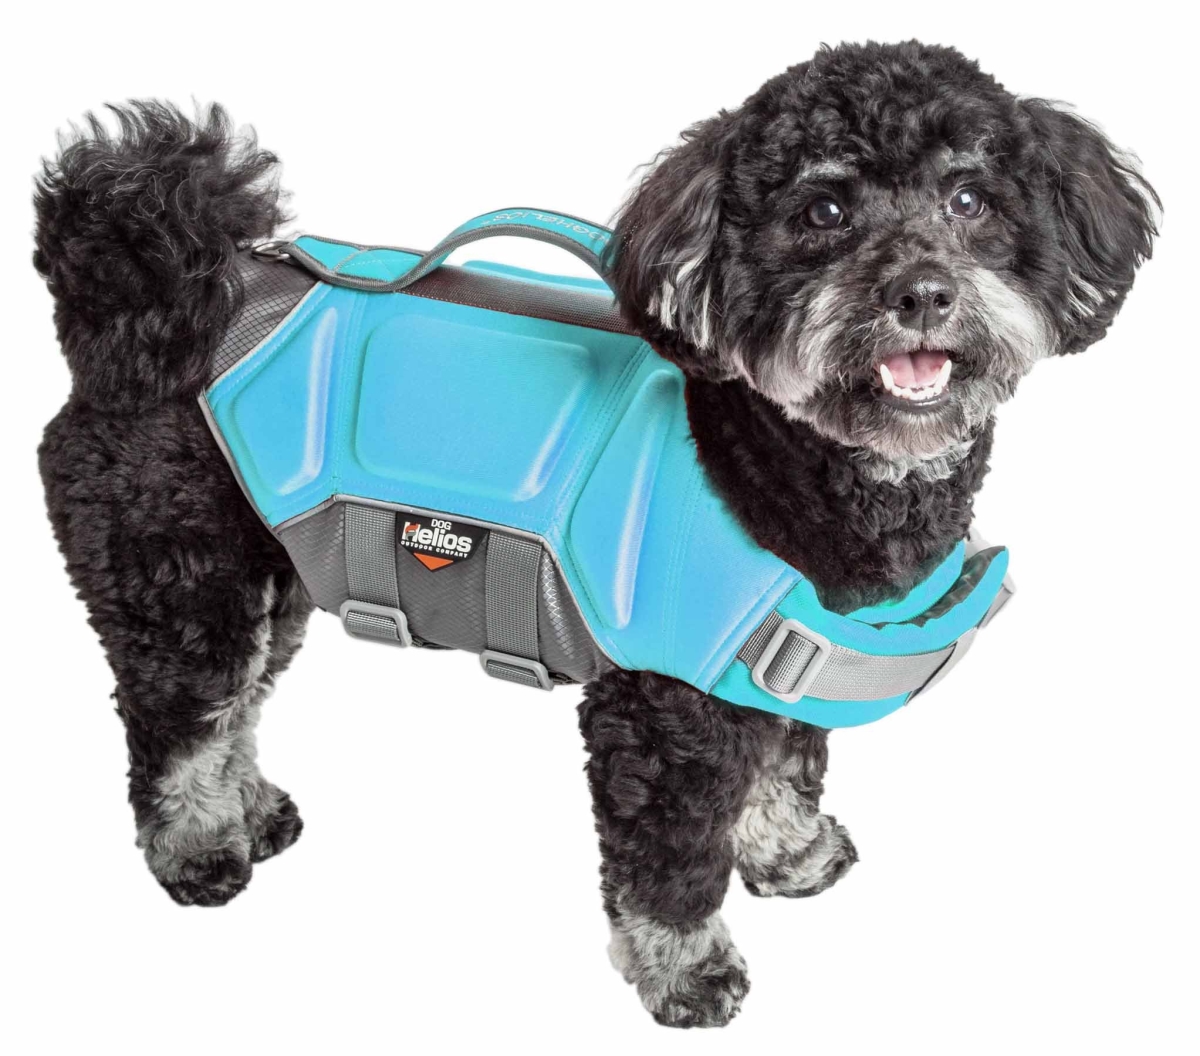 Picture of Dog Helios HA18LBSM Tidal Guard Multi-Point Strategically-Stitched Reflective Pet Dog Life Jacket Vest - Light Blue, Small